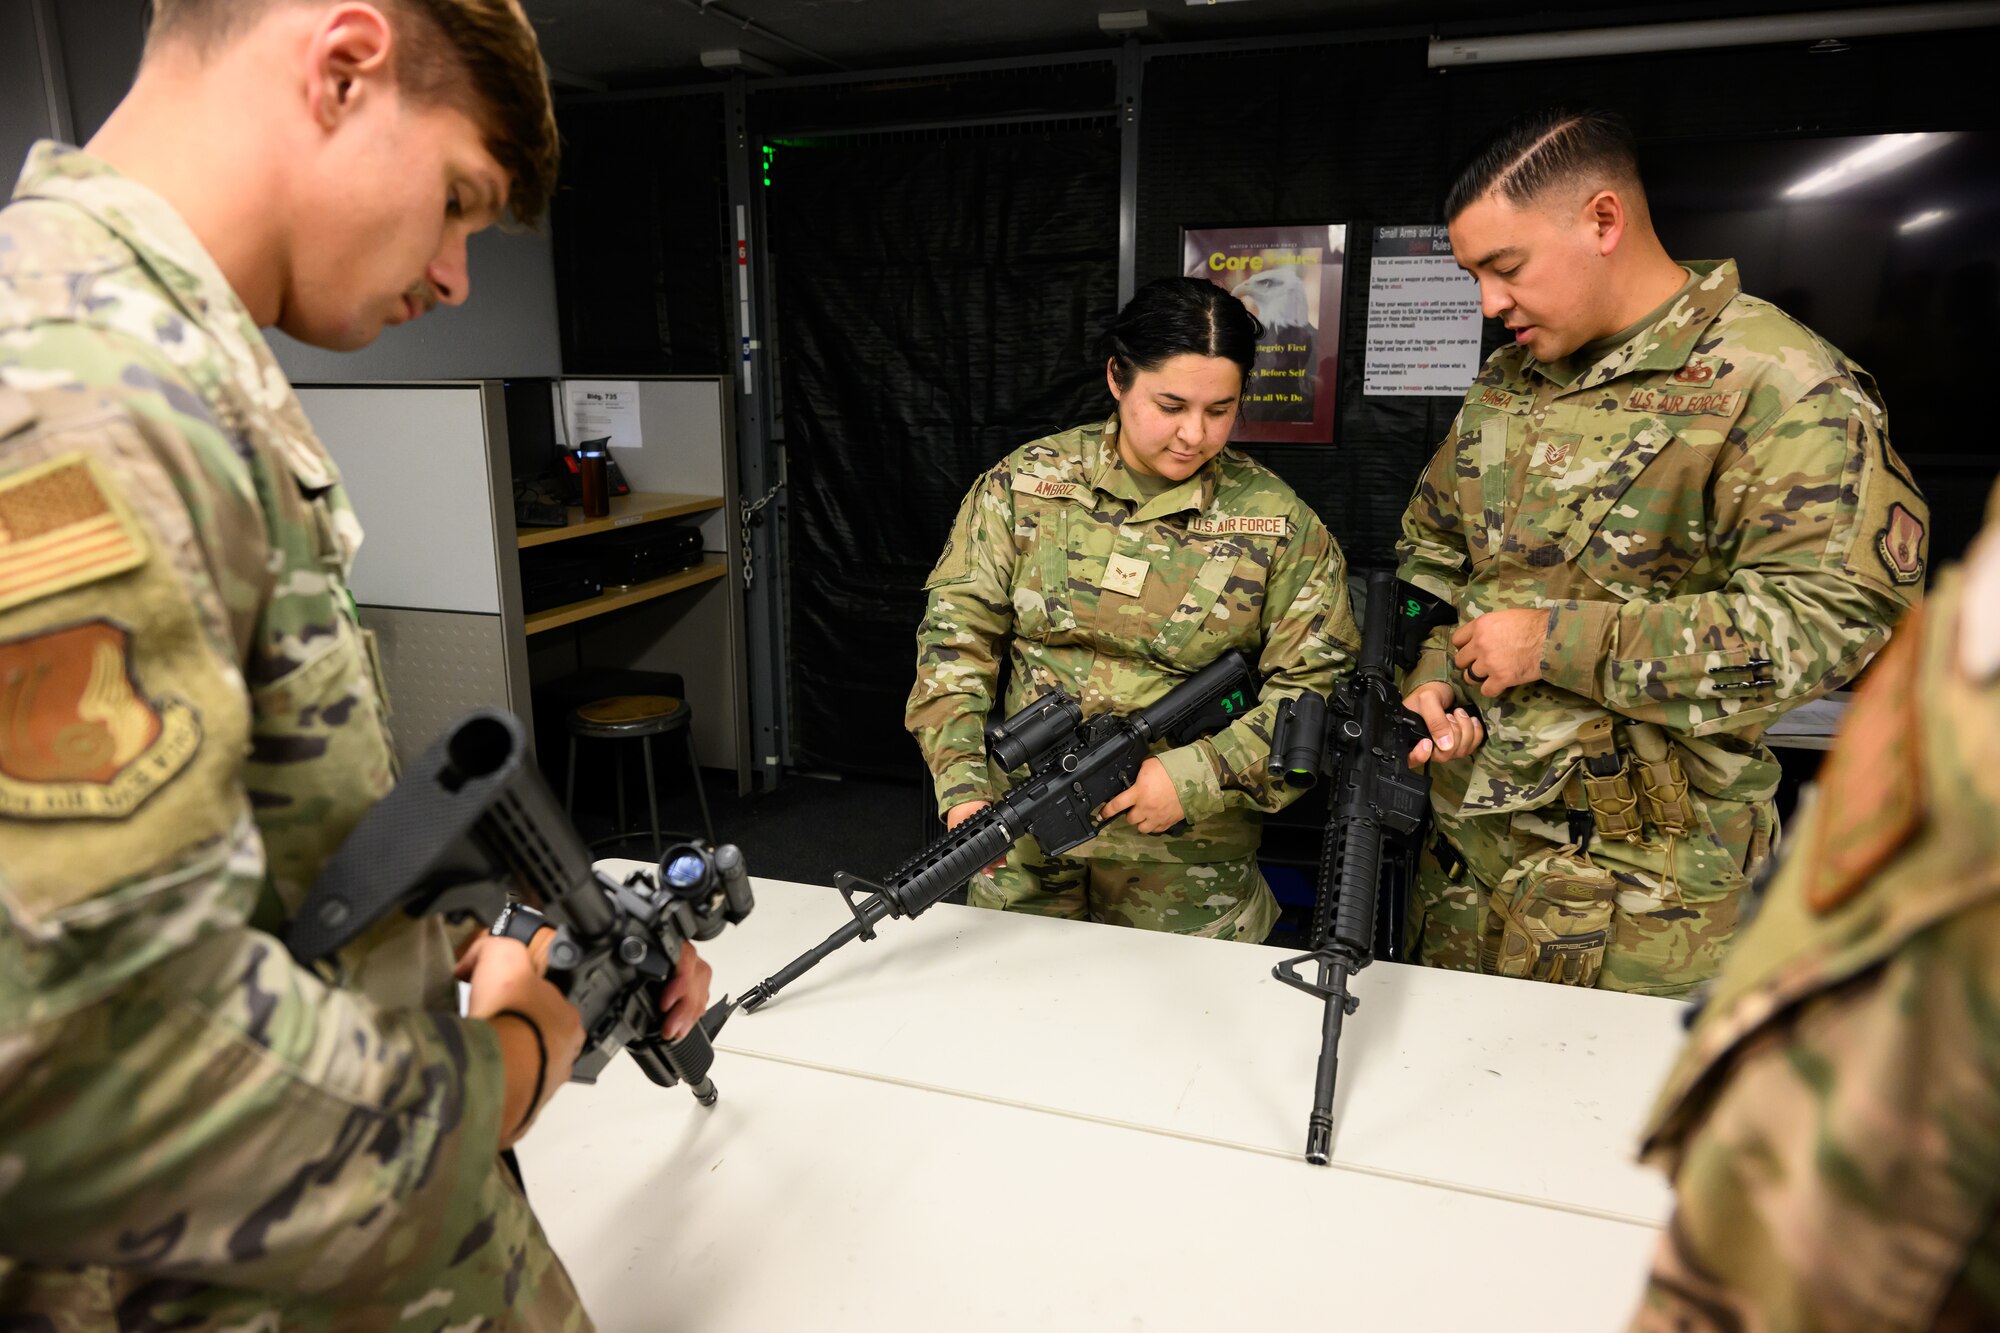 Right, Tech. Sgt. Christopher Baca, 75th Security Forces Squadron, instructs Airman 1st Class Angela Ambriz, 75th Air Base Wing, in weapons handling during an Ability to Survive and Operate rodeo (ATSO) at Hill Air Force Base, Utah, Sept. 13, 2022.